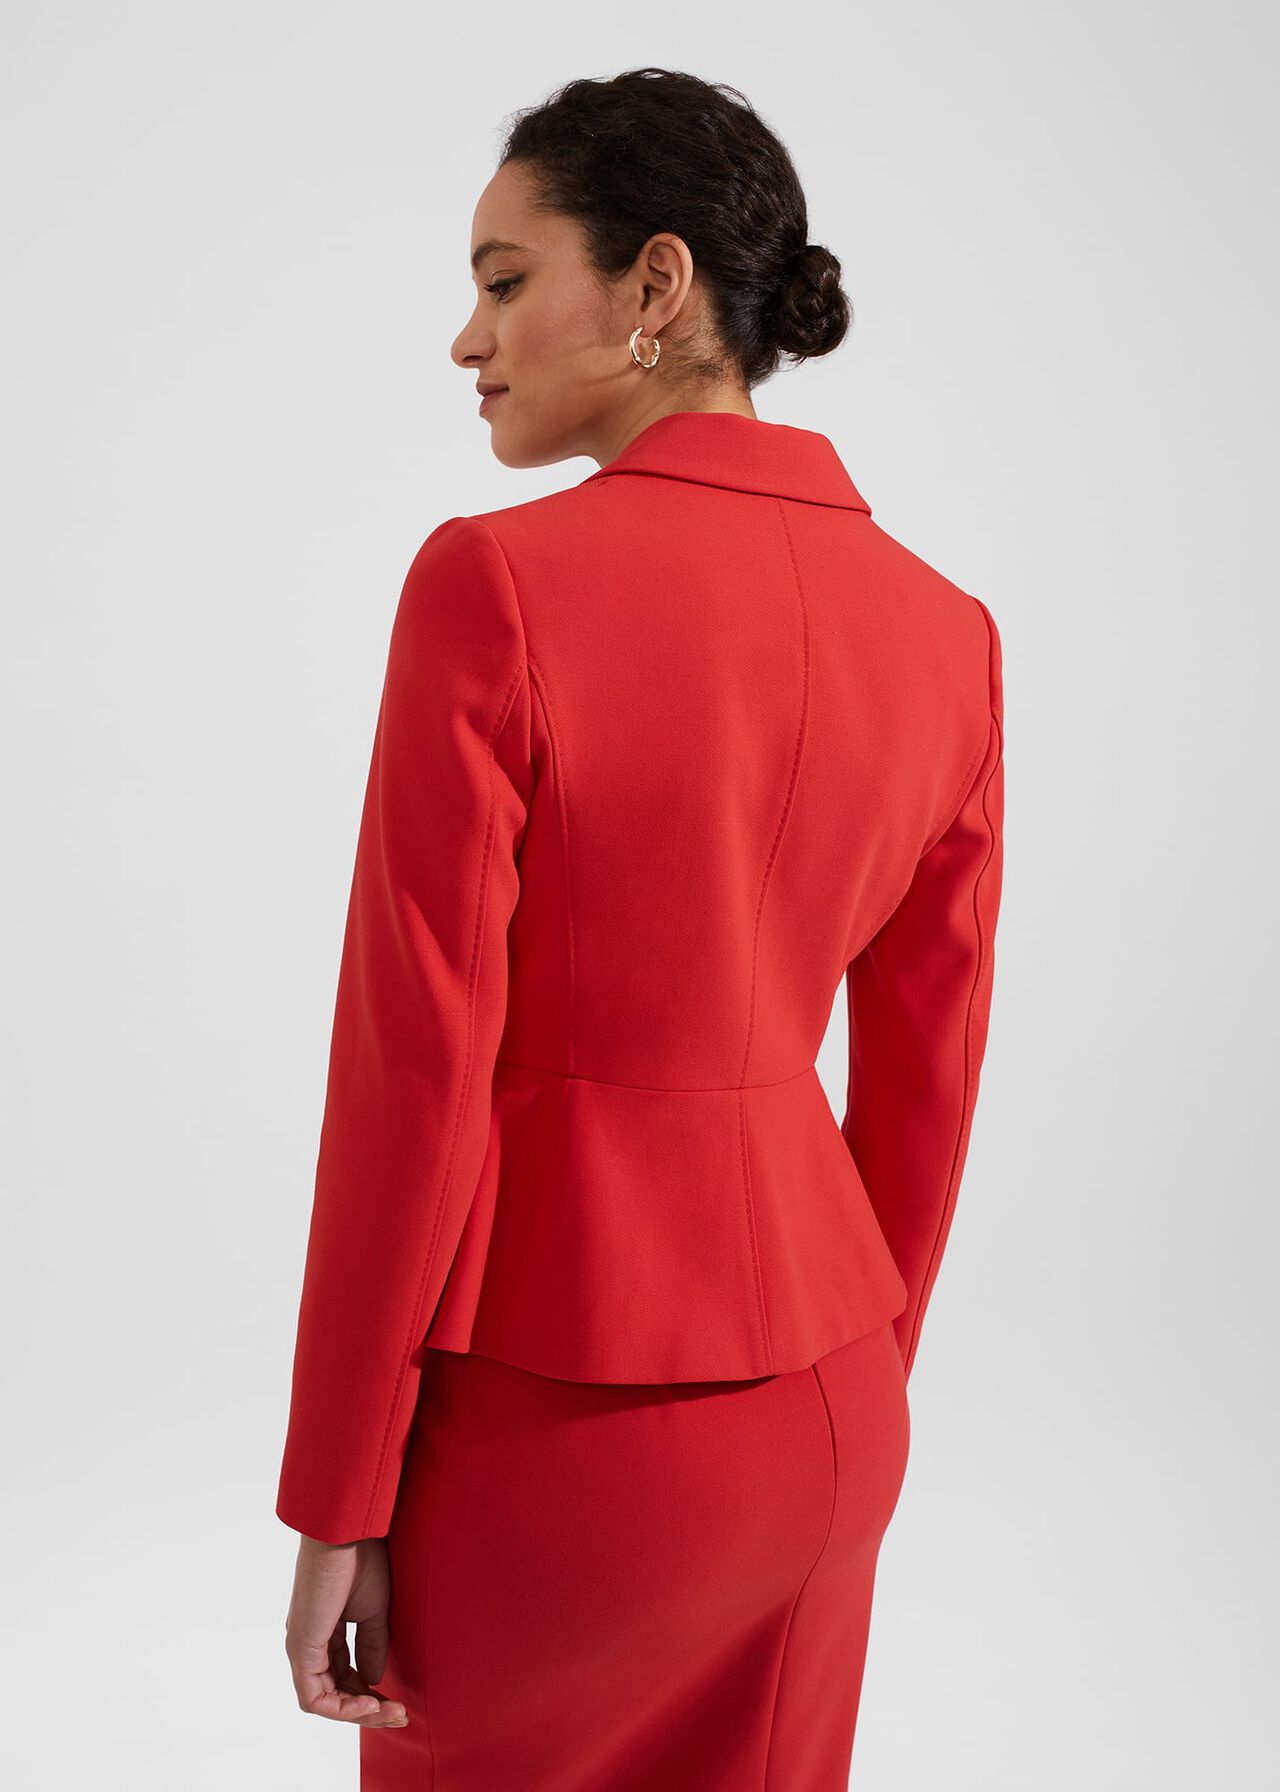 Brielle Jacket, Cherry Red, hi-res